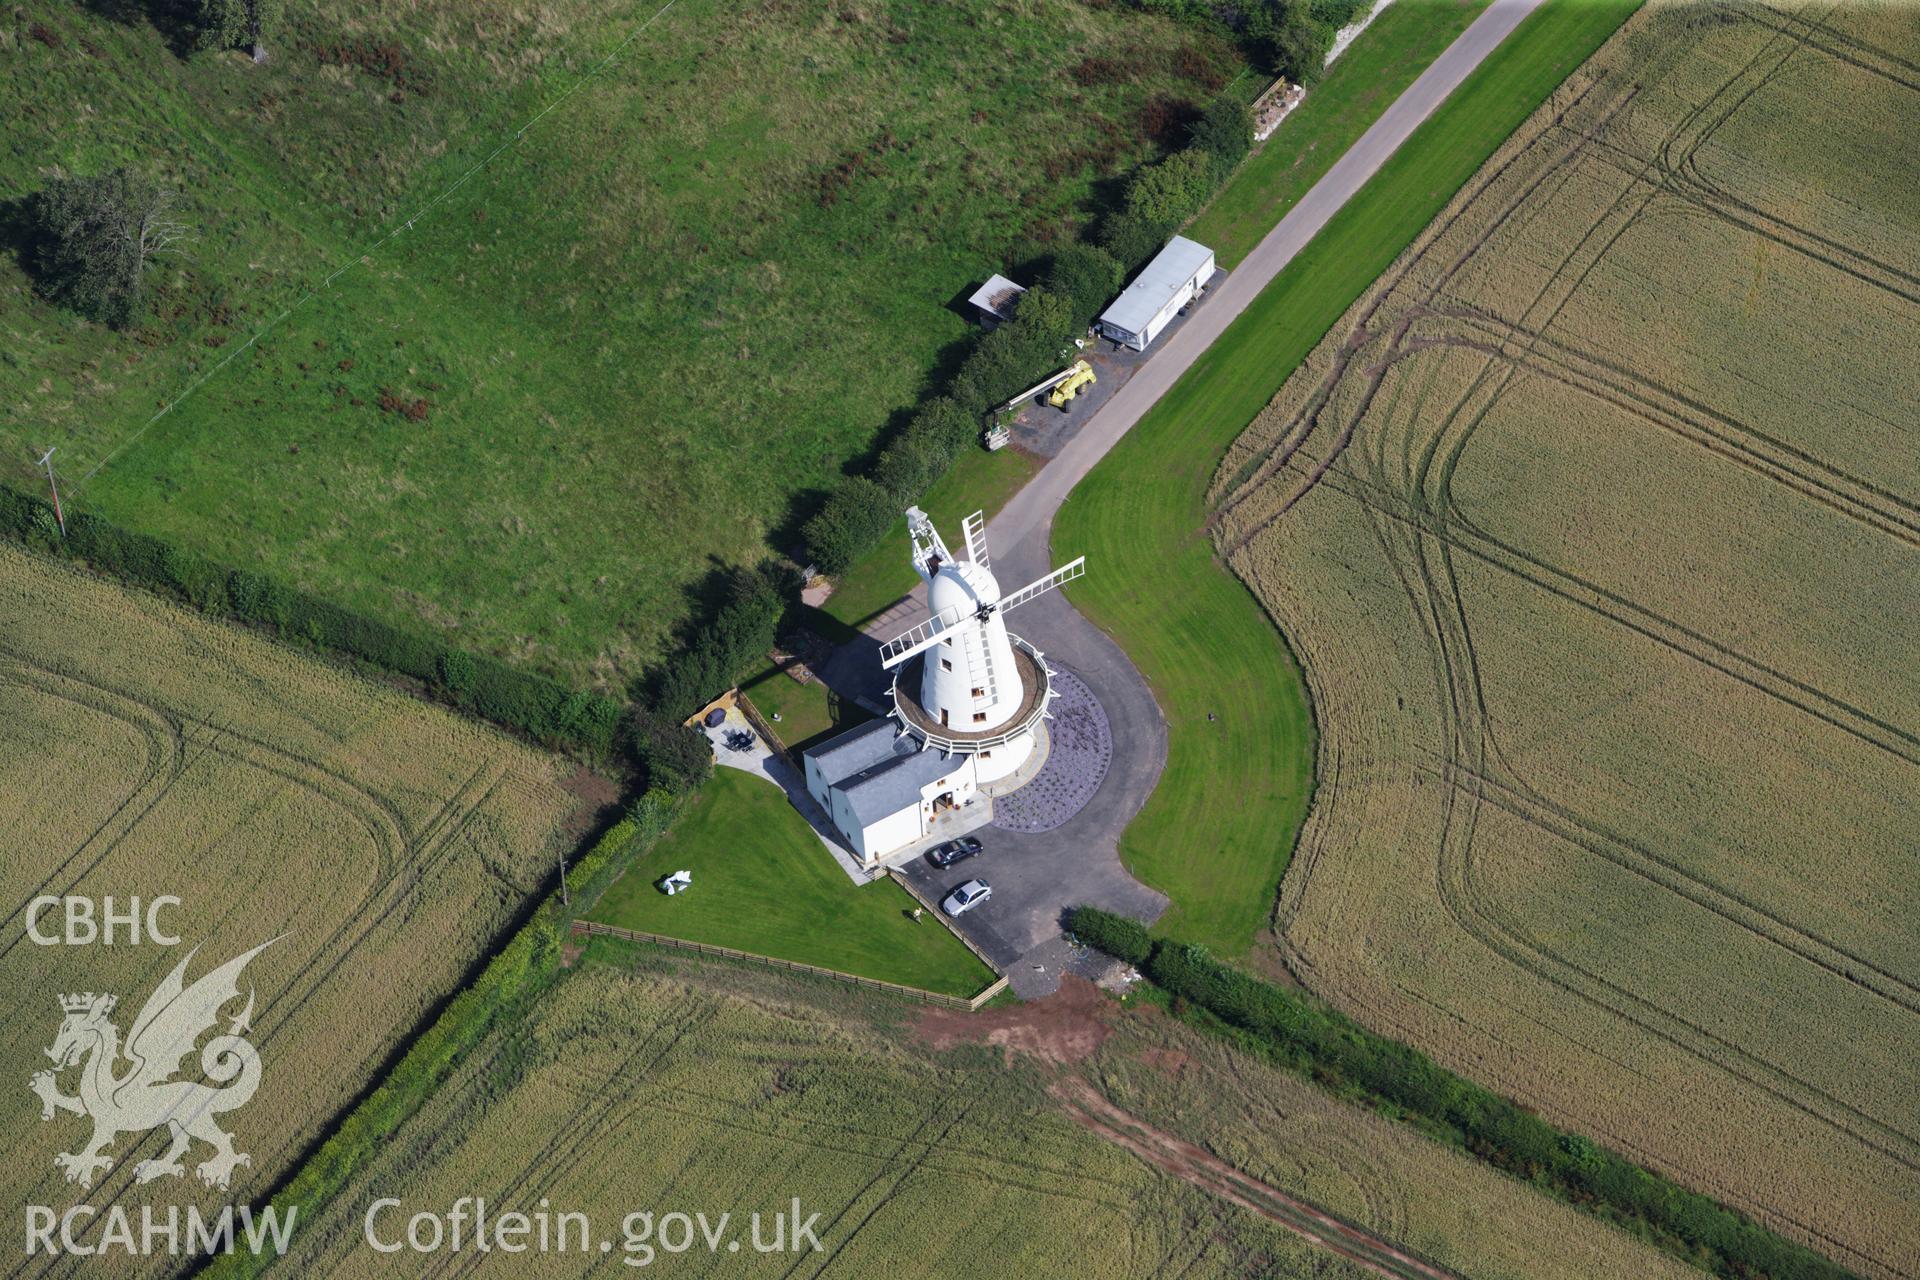 RCAHMW colour oblique aerial photograph of Llancayo Farm Windmill, near Usk. Taken on 23 July 2009 by Toby Driver